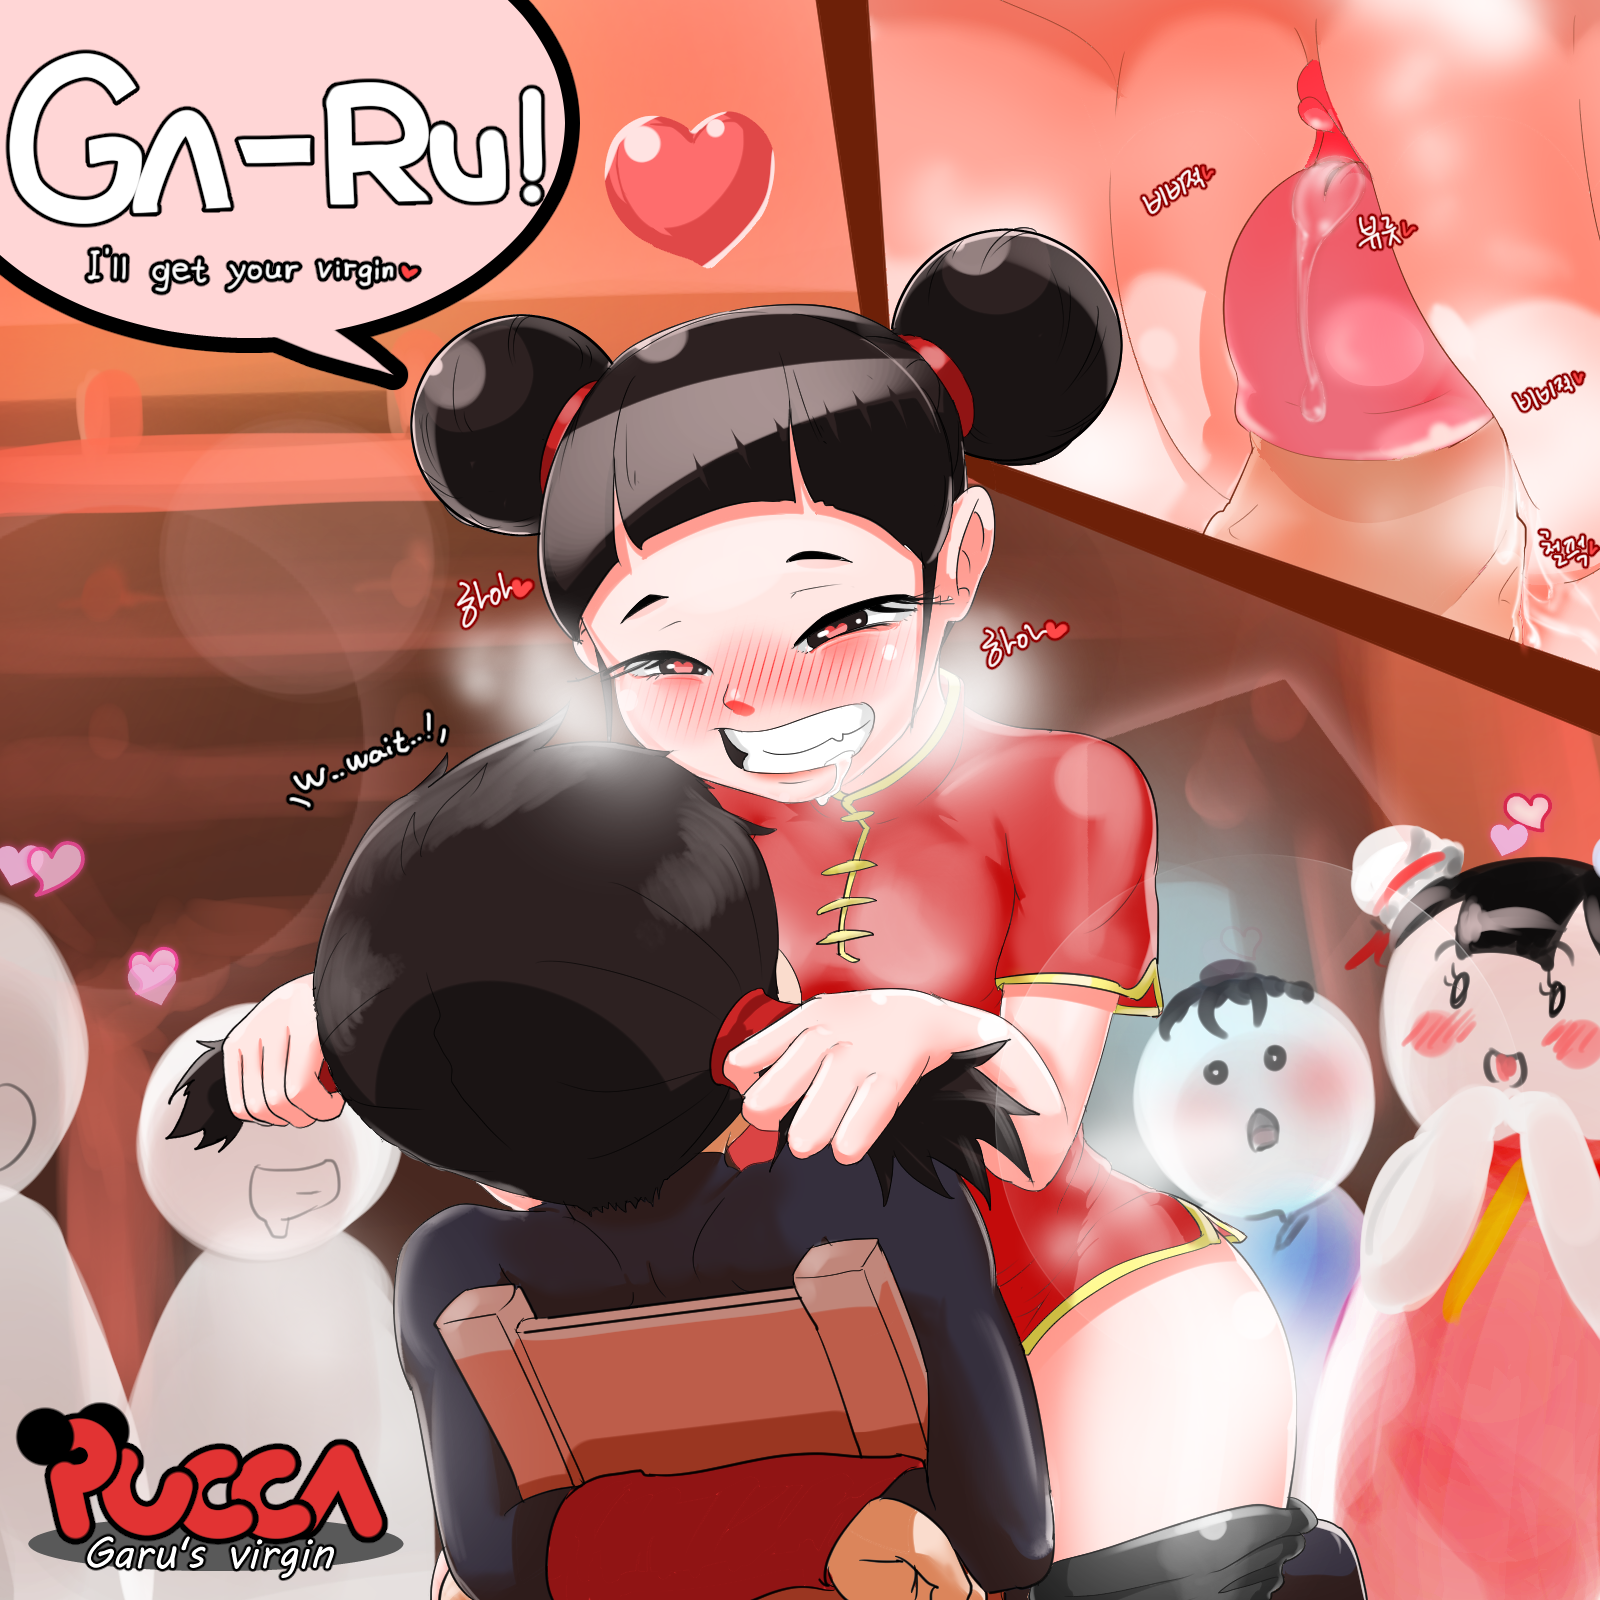 Pucca r34